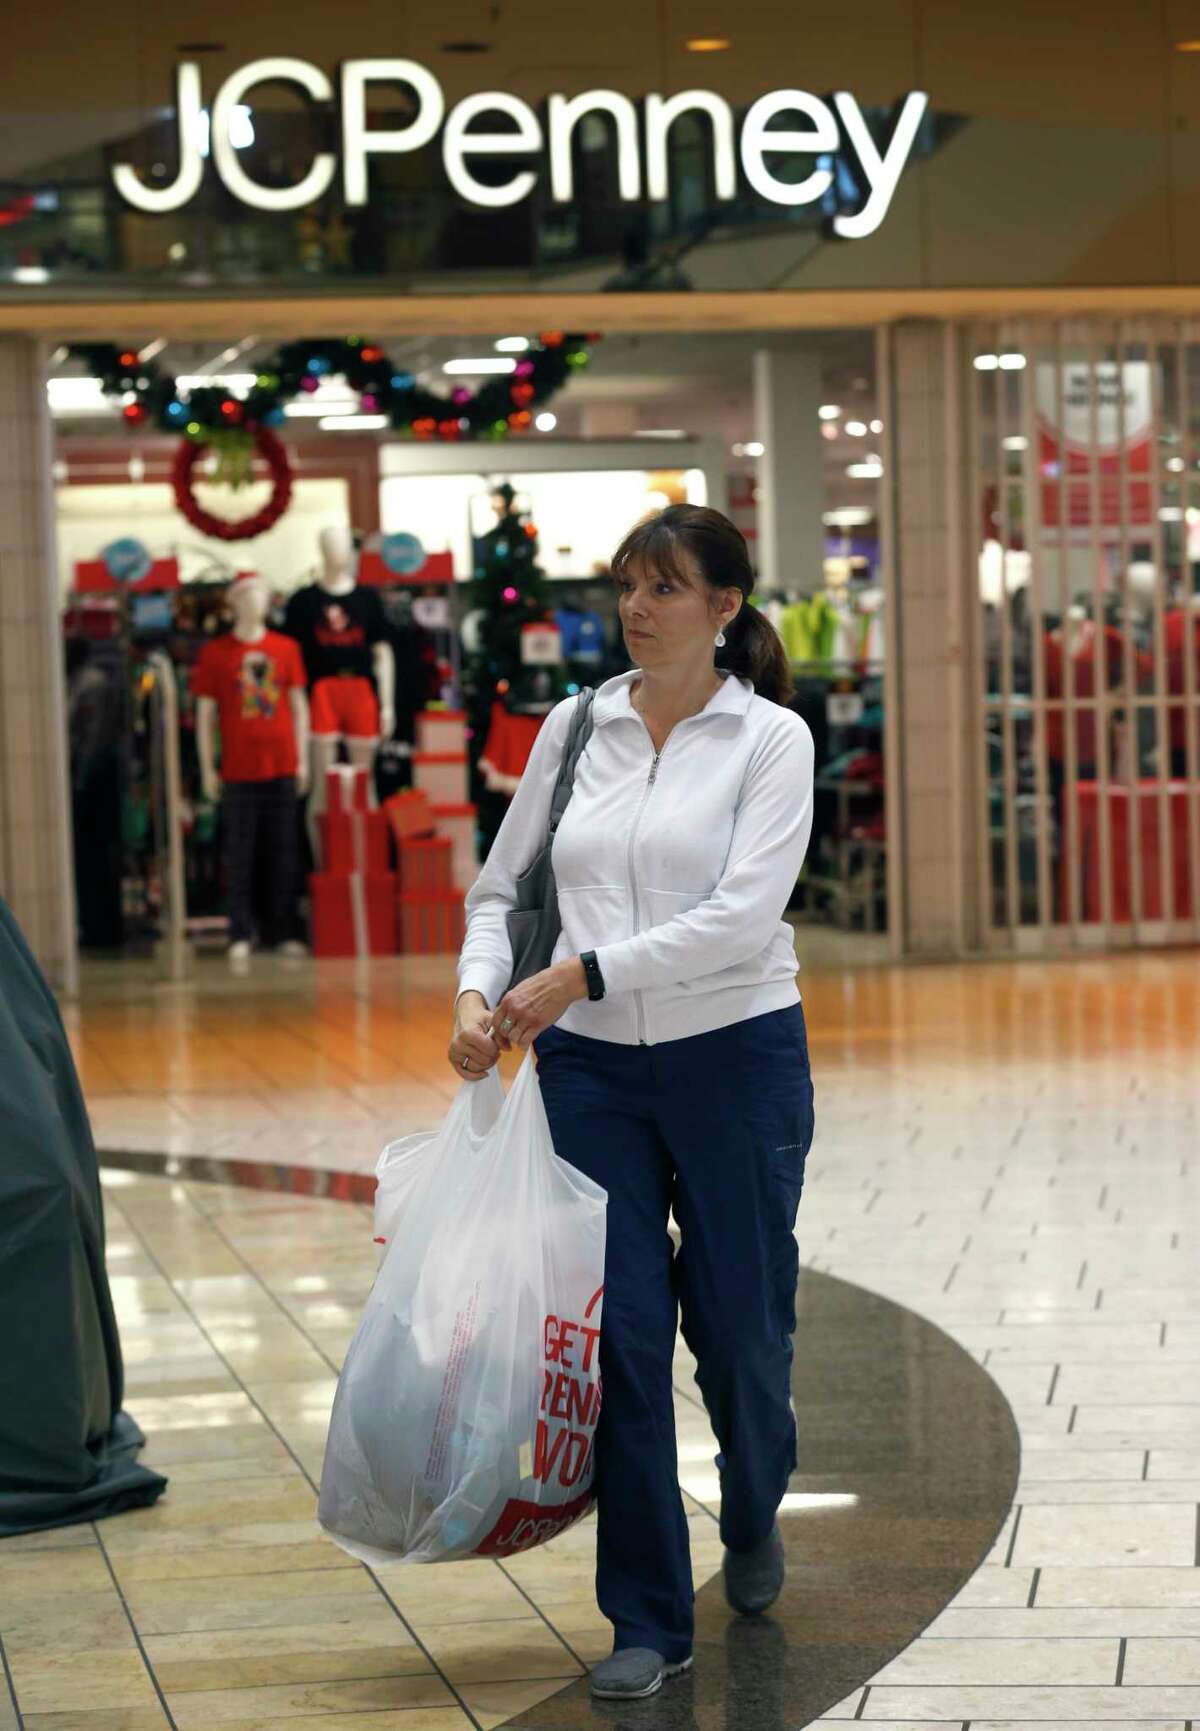 Houston sales tax revenue totaled $54.7 million in November, the start of the holiday shopping season. That's up 12.8 percent from the same month last year.